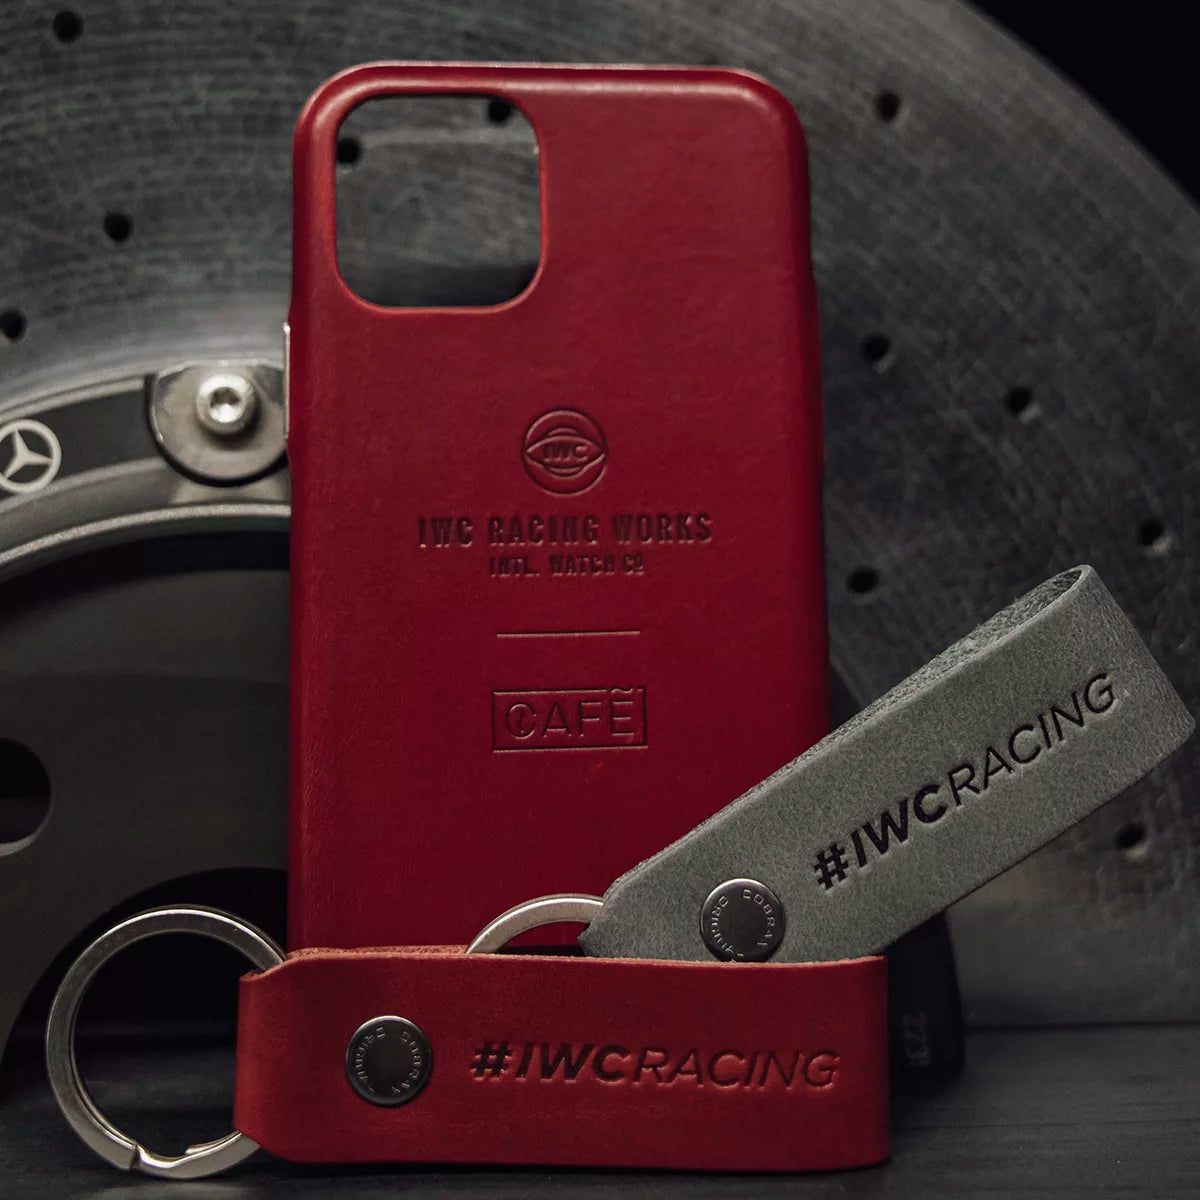 iwc iphone case and keychains